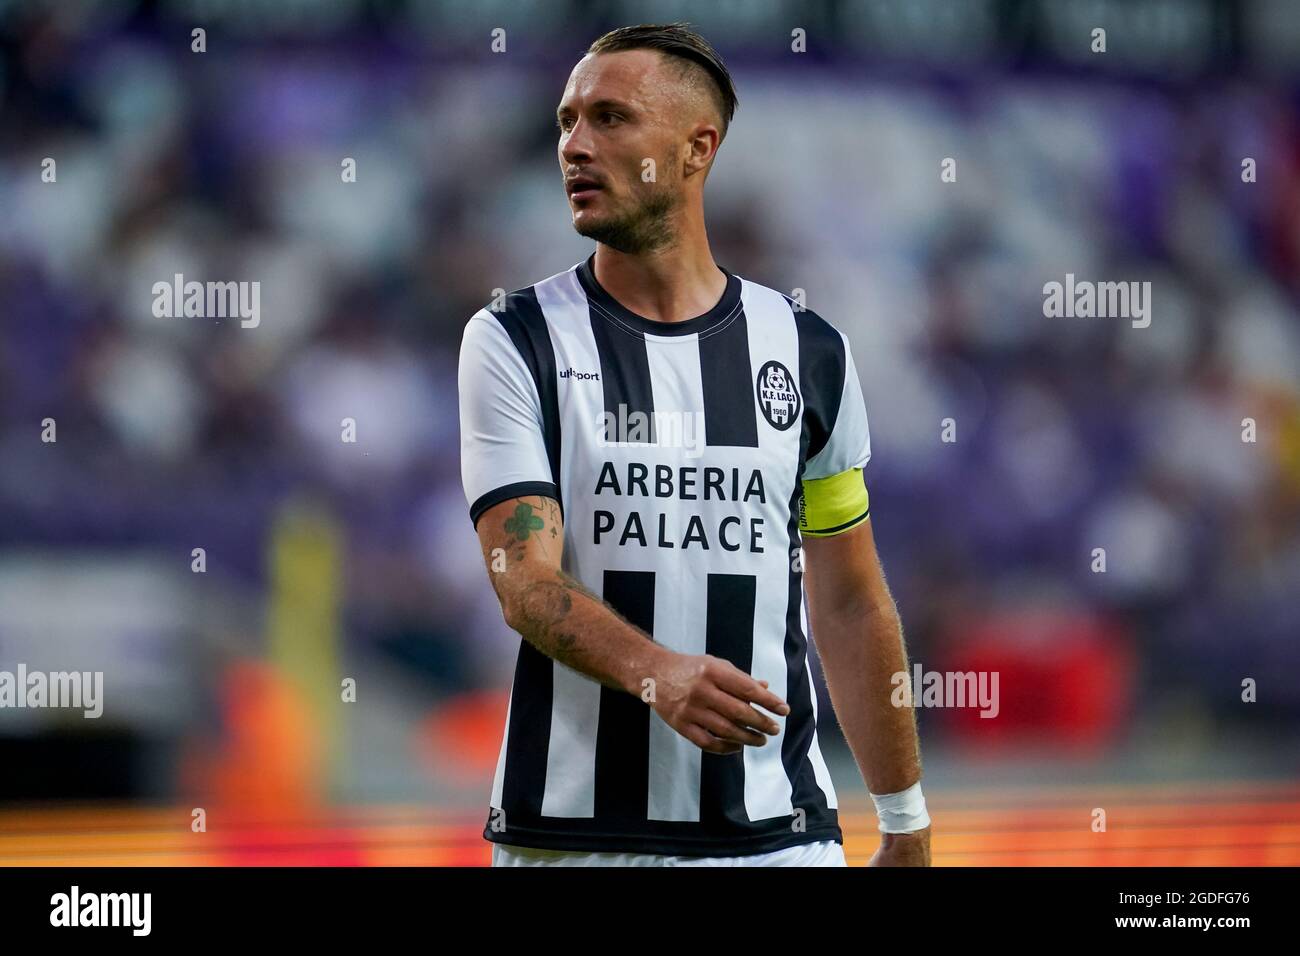 Brussels, Belgium. 12th Aug, 2021. BRUSSELS, BELGIUM - AUGUST 12:  Aleksandar Ignjatovic of KF Laci during the UEFA Europa Conference League  Qualification match between RSC Anderlecht and KF Laci at Lotto Park